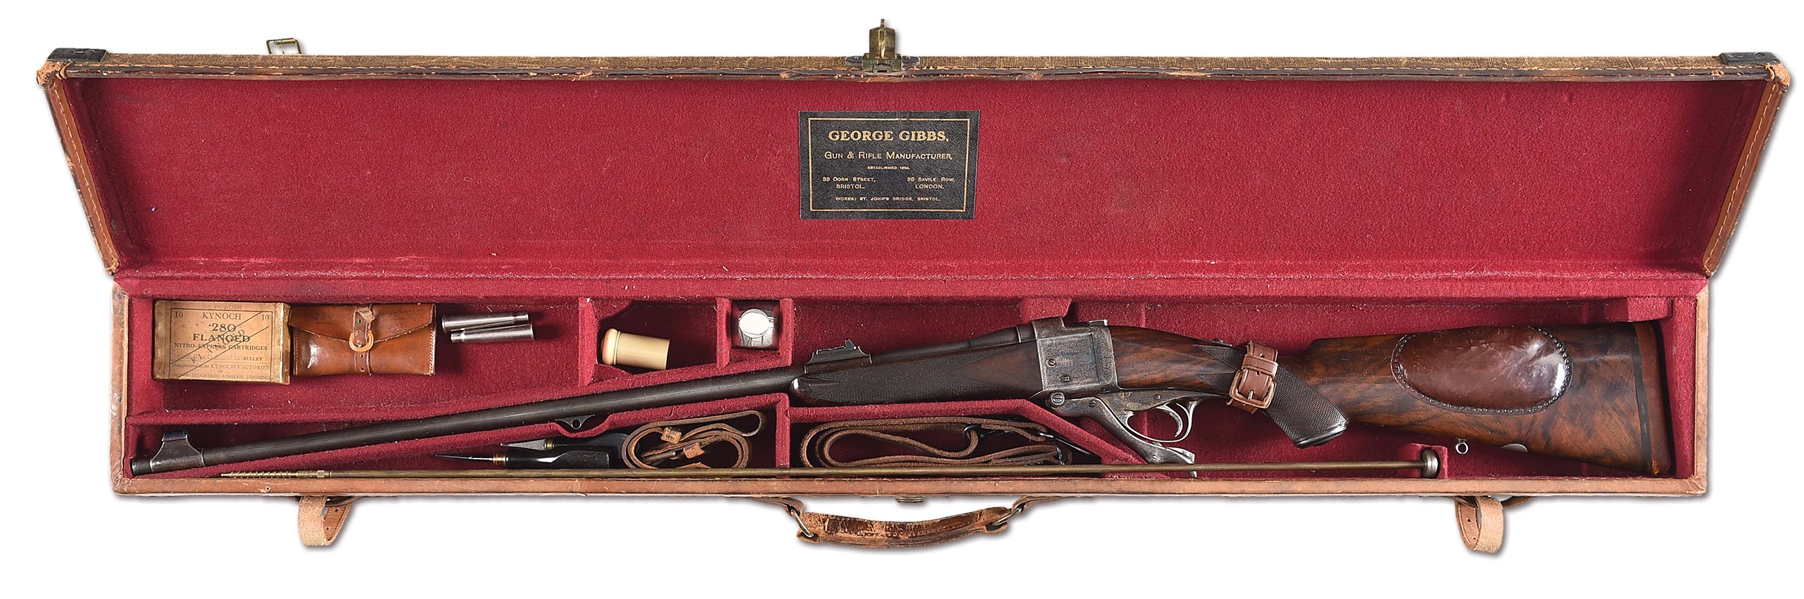 (C) CASED GIBBS FARQUHARSON SINGLE SHOT .280 FLANGED NITRO EXPRESS RIFLE, OWNED BY JONATHAN KIRTON AND DISCUSSED IN "THE BRITISH FALLING BLOCK BREECH LOADING RIFLE FROM 1865".